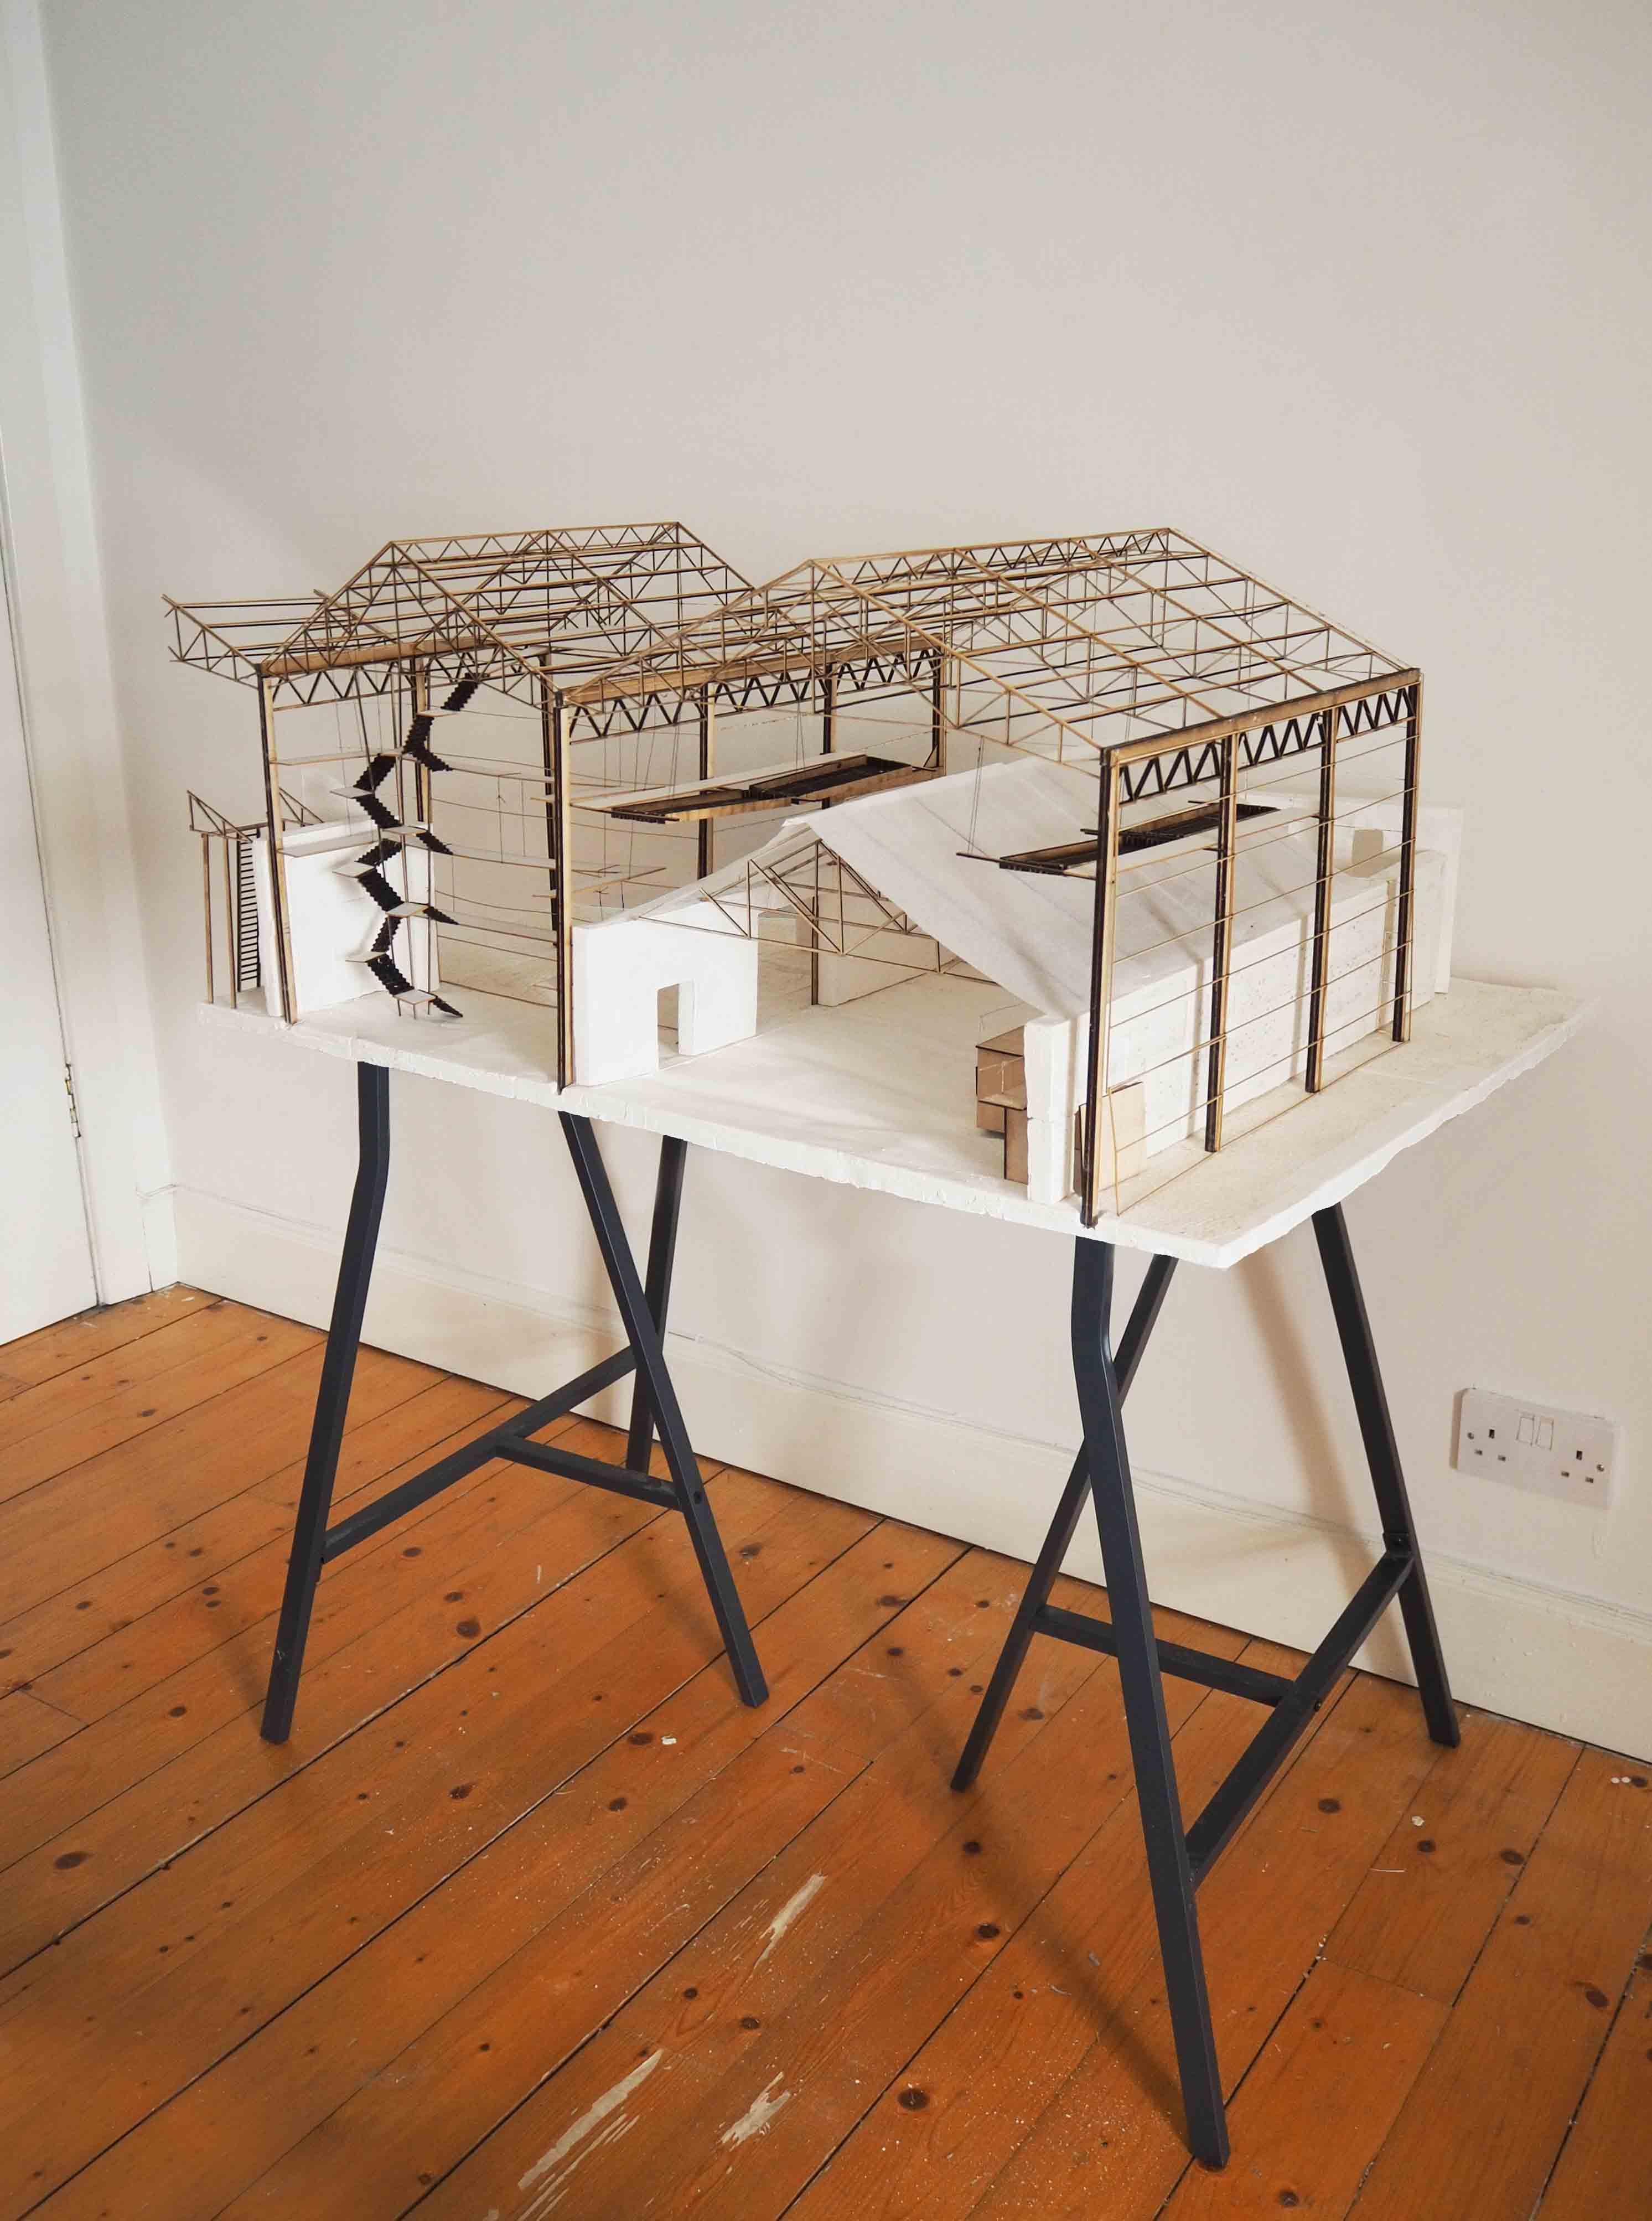 Model made of plaster cast and laser cut plywood elements, showing a section of a glasshouse design proposal in Leith.